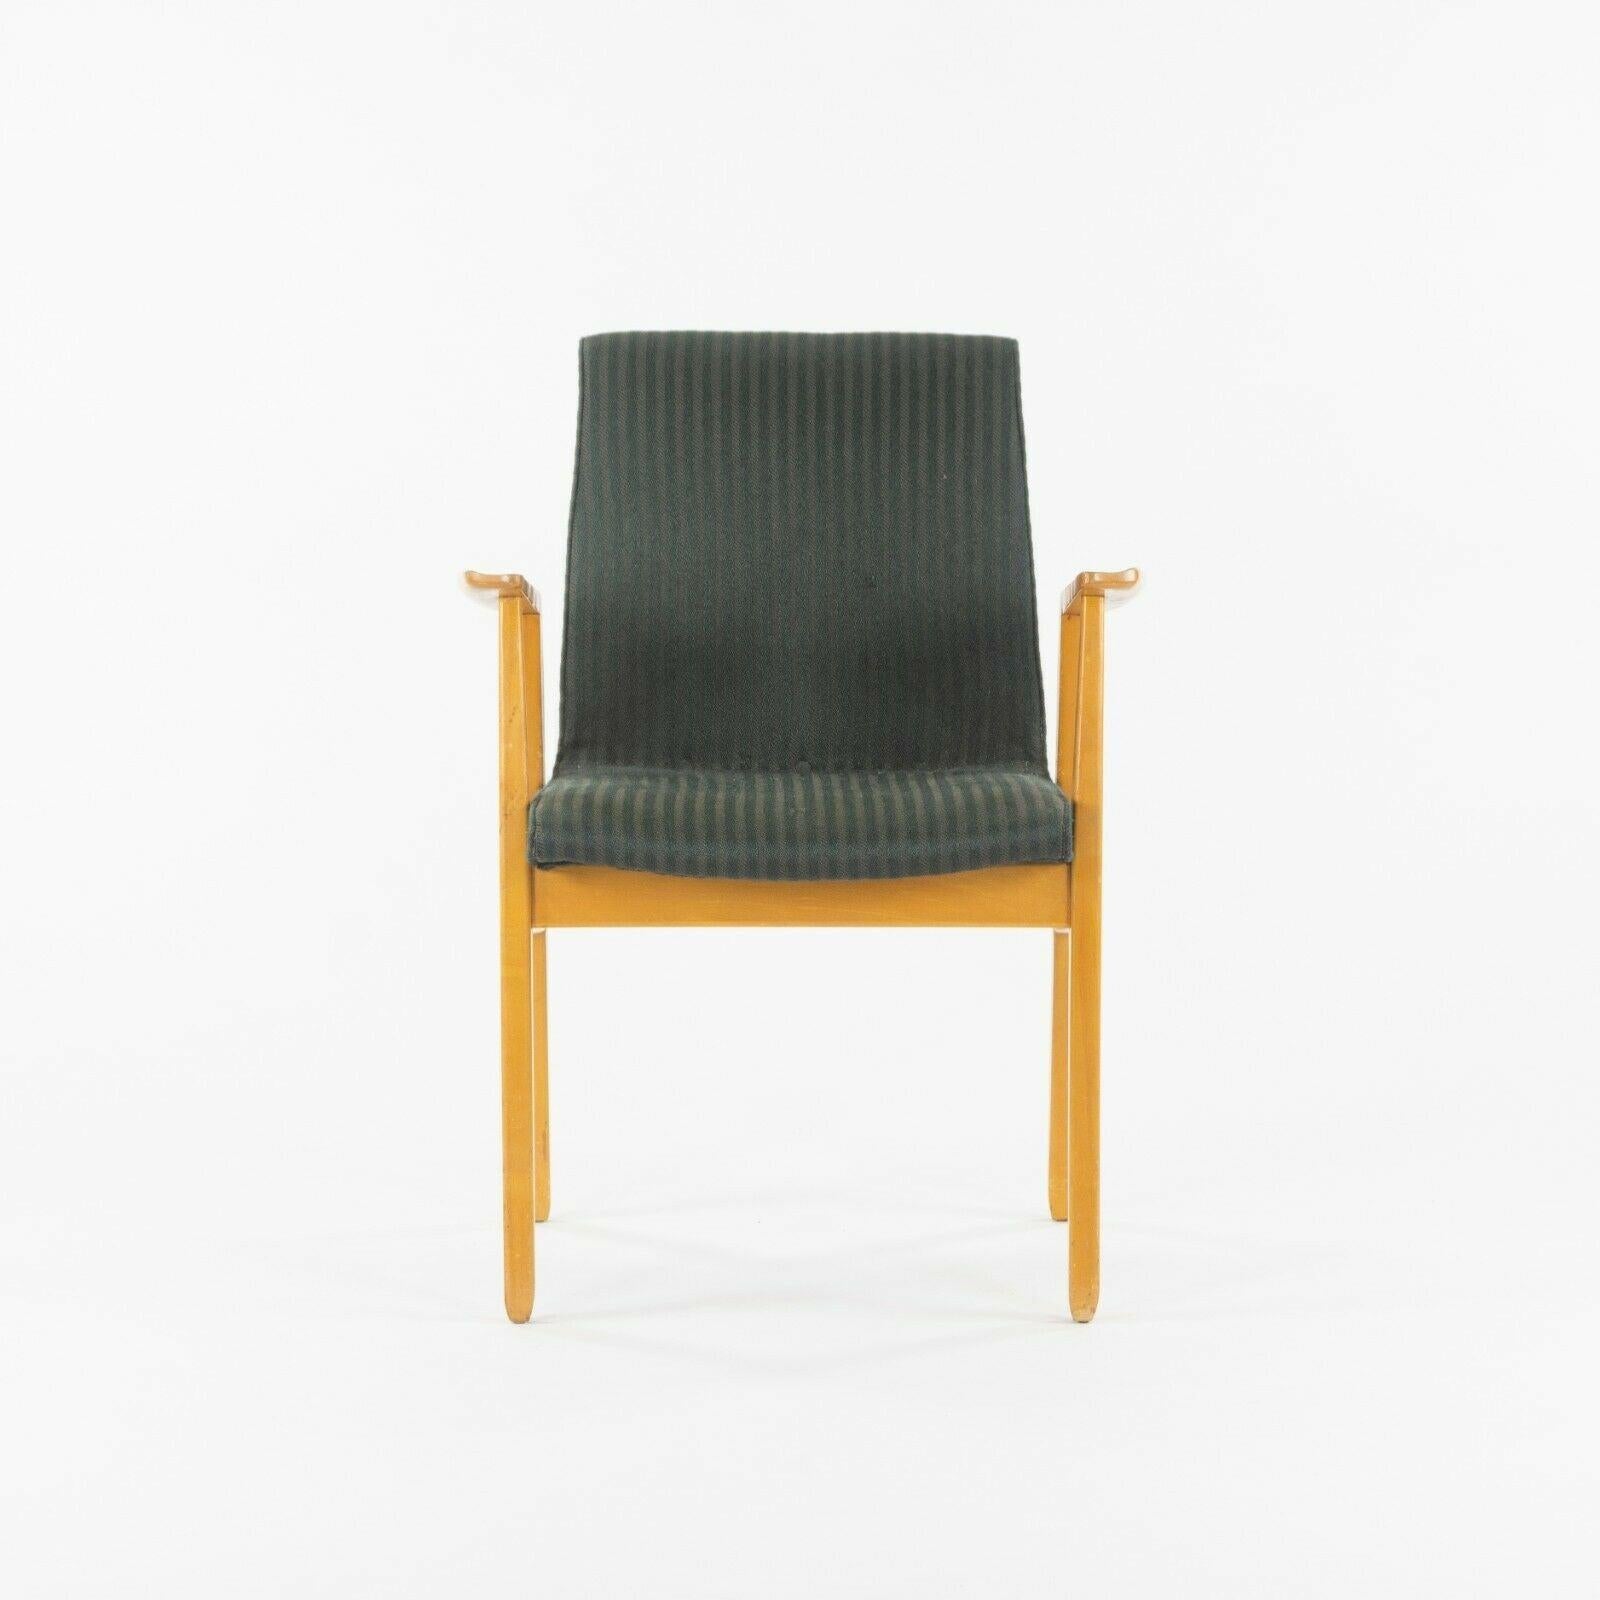 Listed for sale is an exceptional early Knoll Associates armchair, designed by Jens Risom. This example has what looks to be a natural maple frame and lovely striped black fabric. The chair notably retains its original Knoll Associates label, which